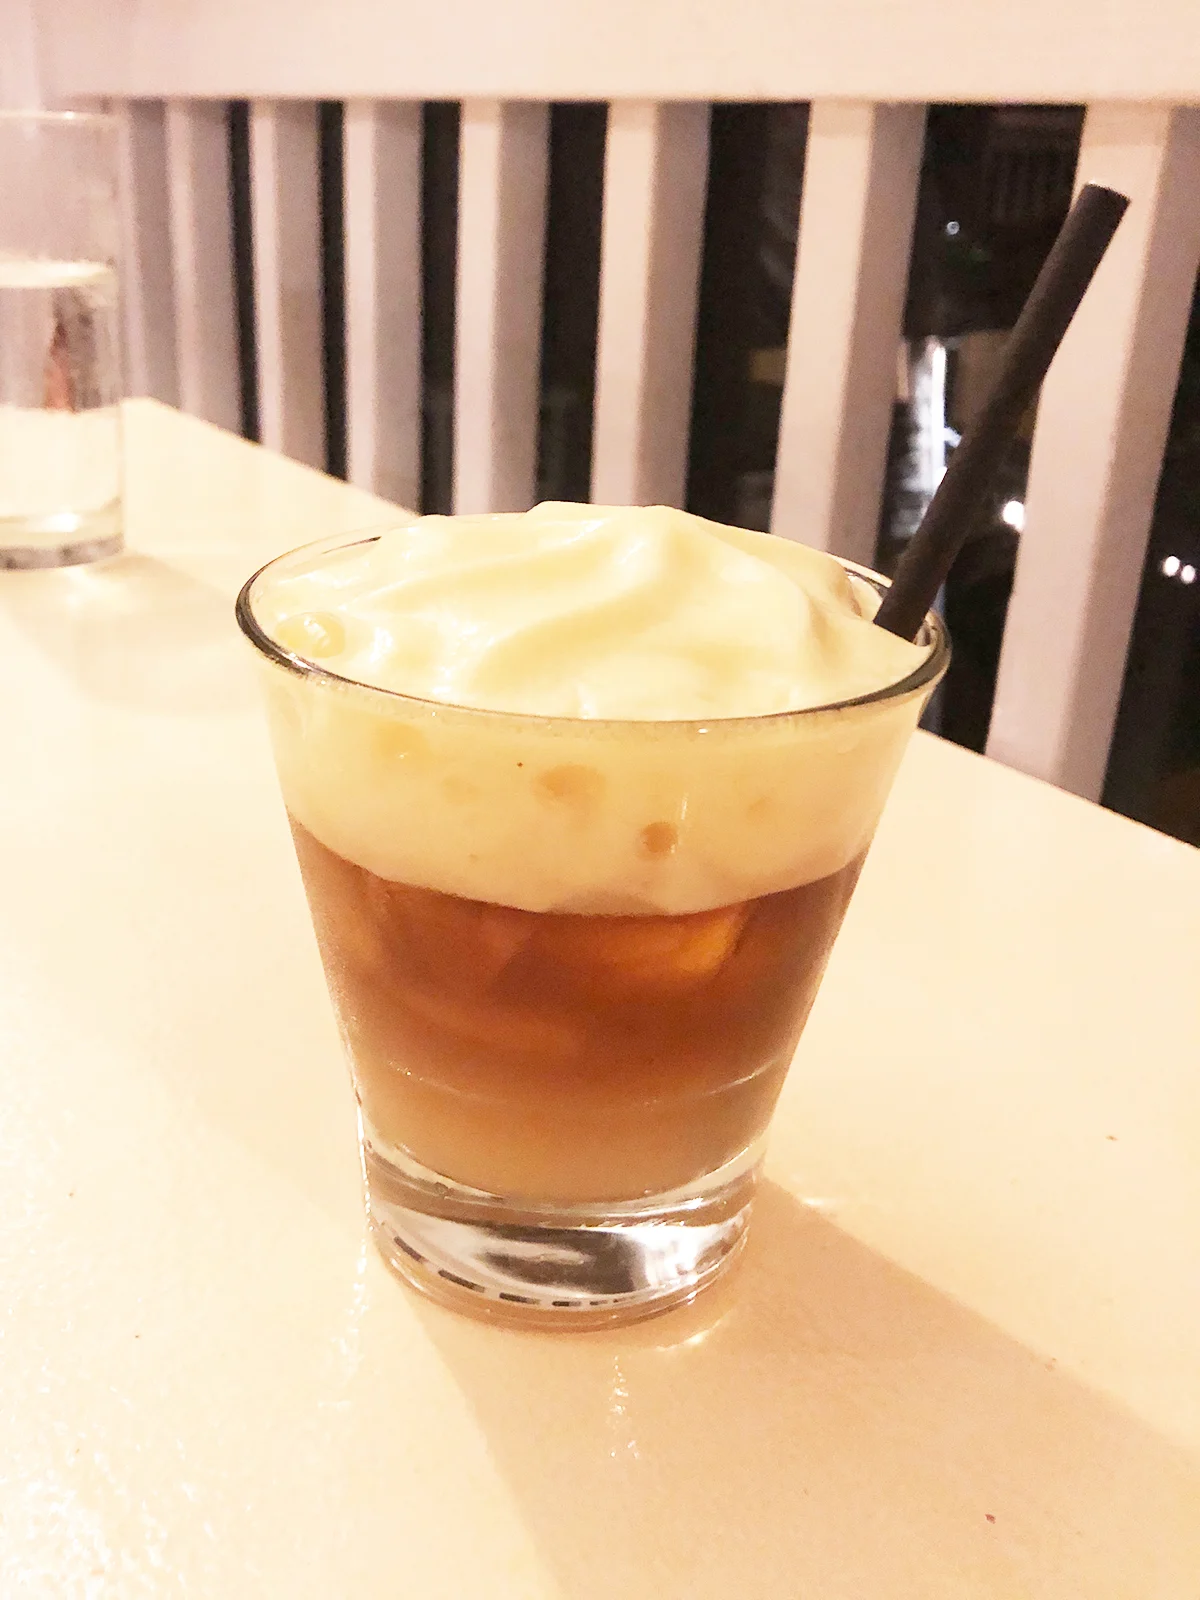 tan drink in glass with creamy foam on top with straw